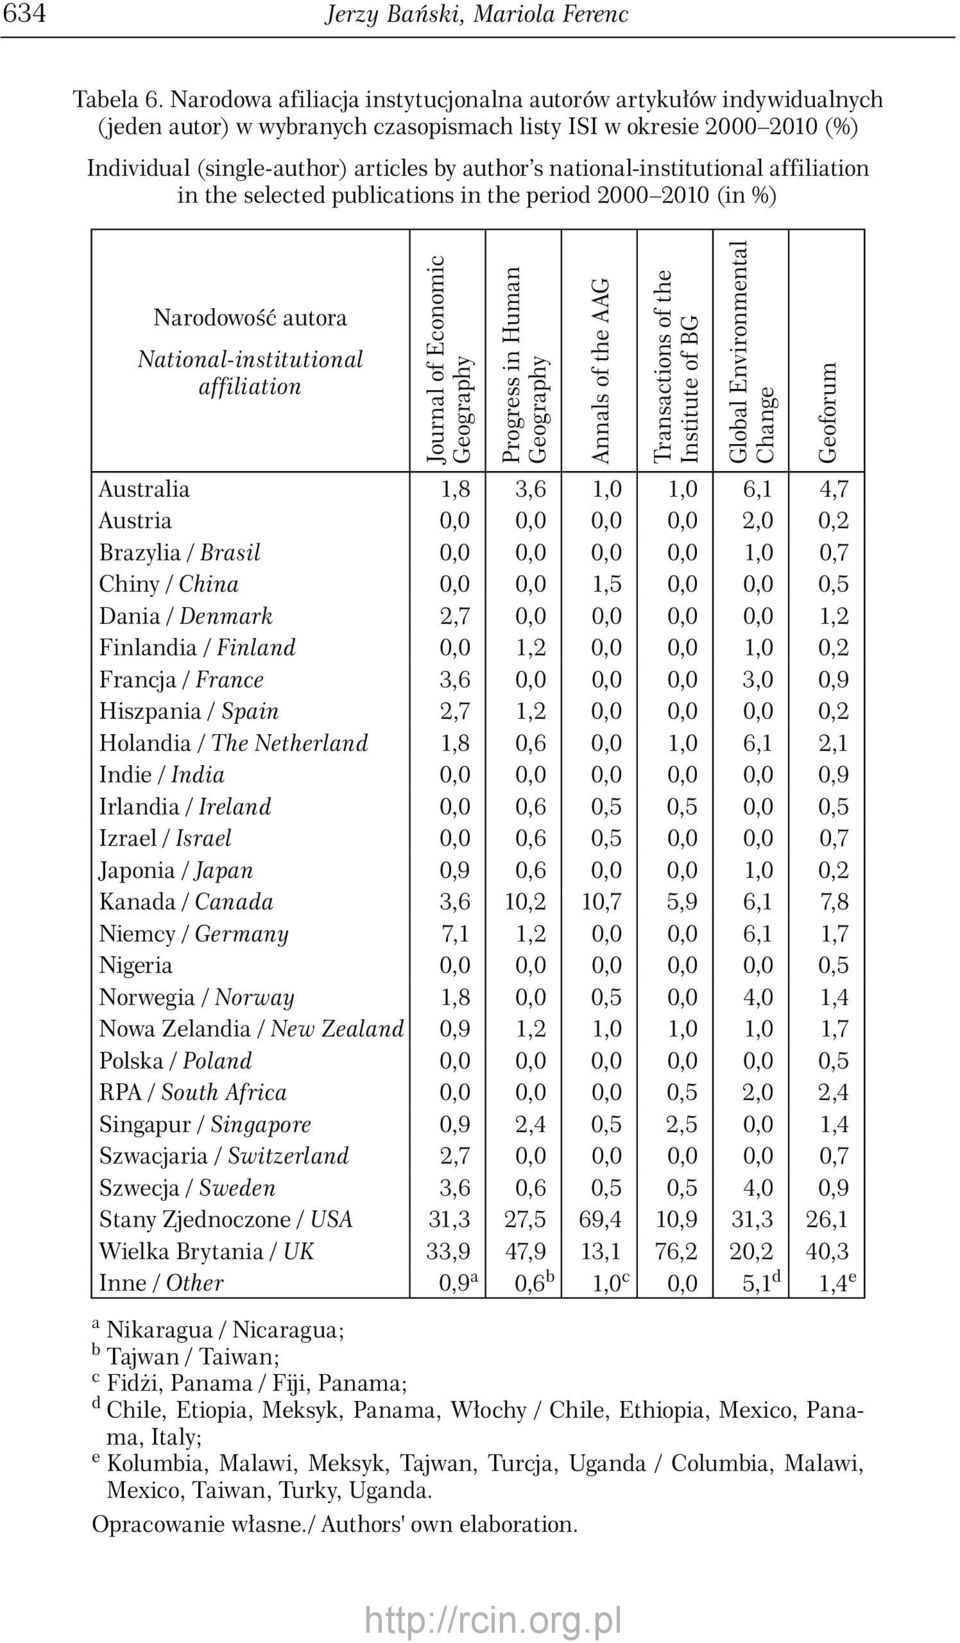 national-institutional affiliation in the selected publications in the period (in %) Narodowość autora National-institutional affiliation Journal of Economic Geography Progress in Human Geography